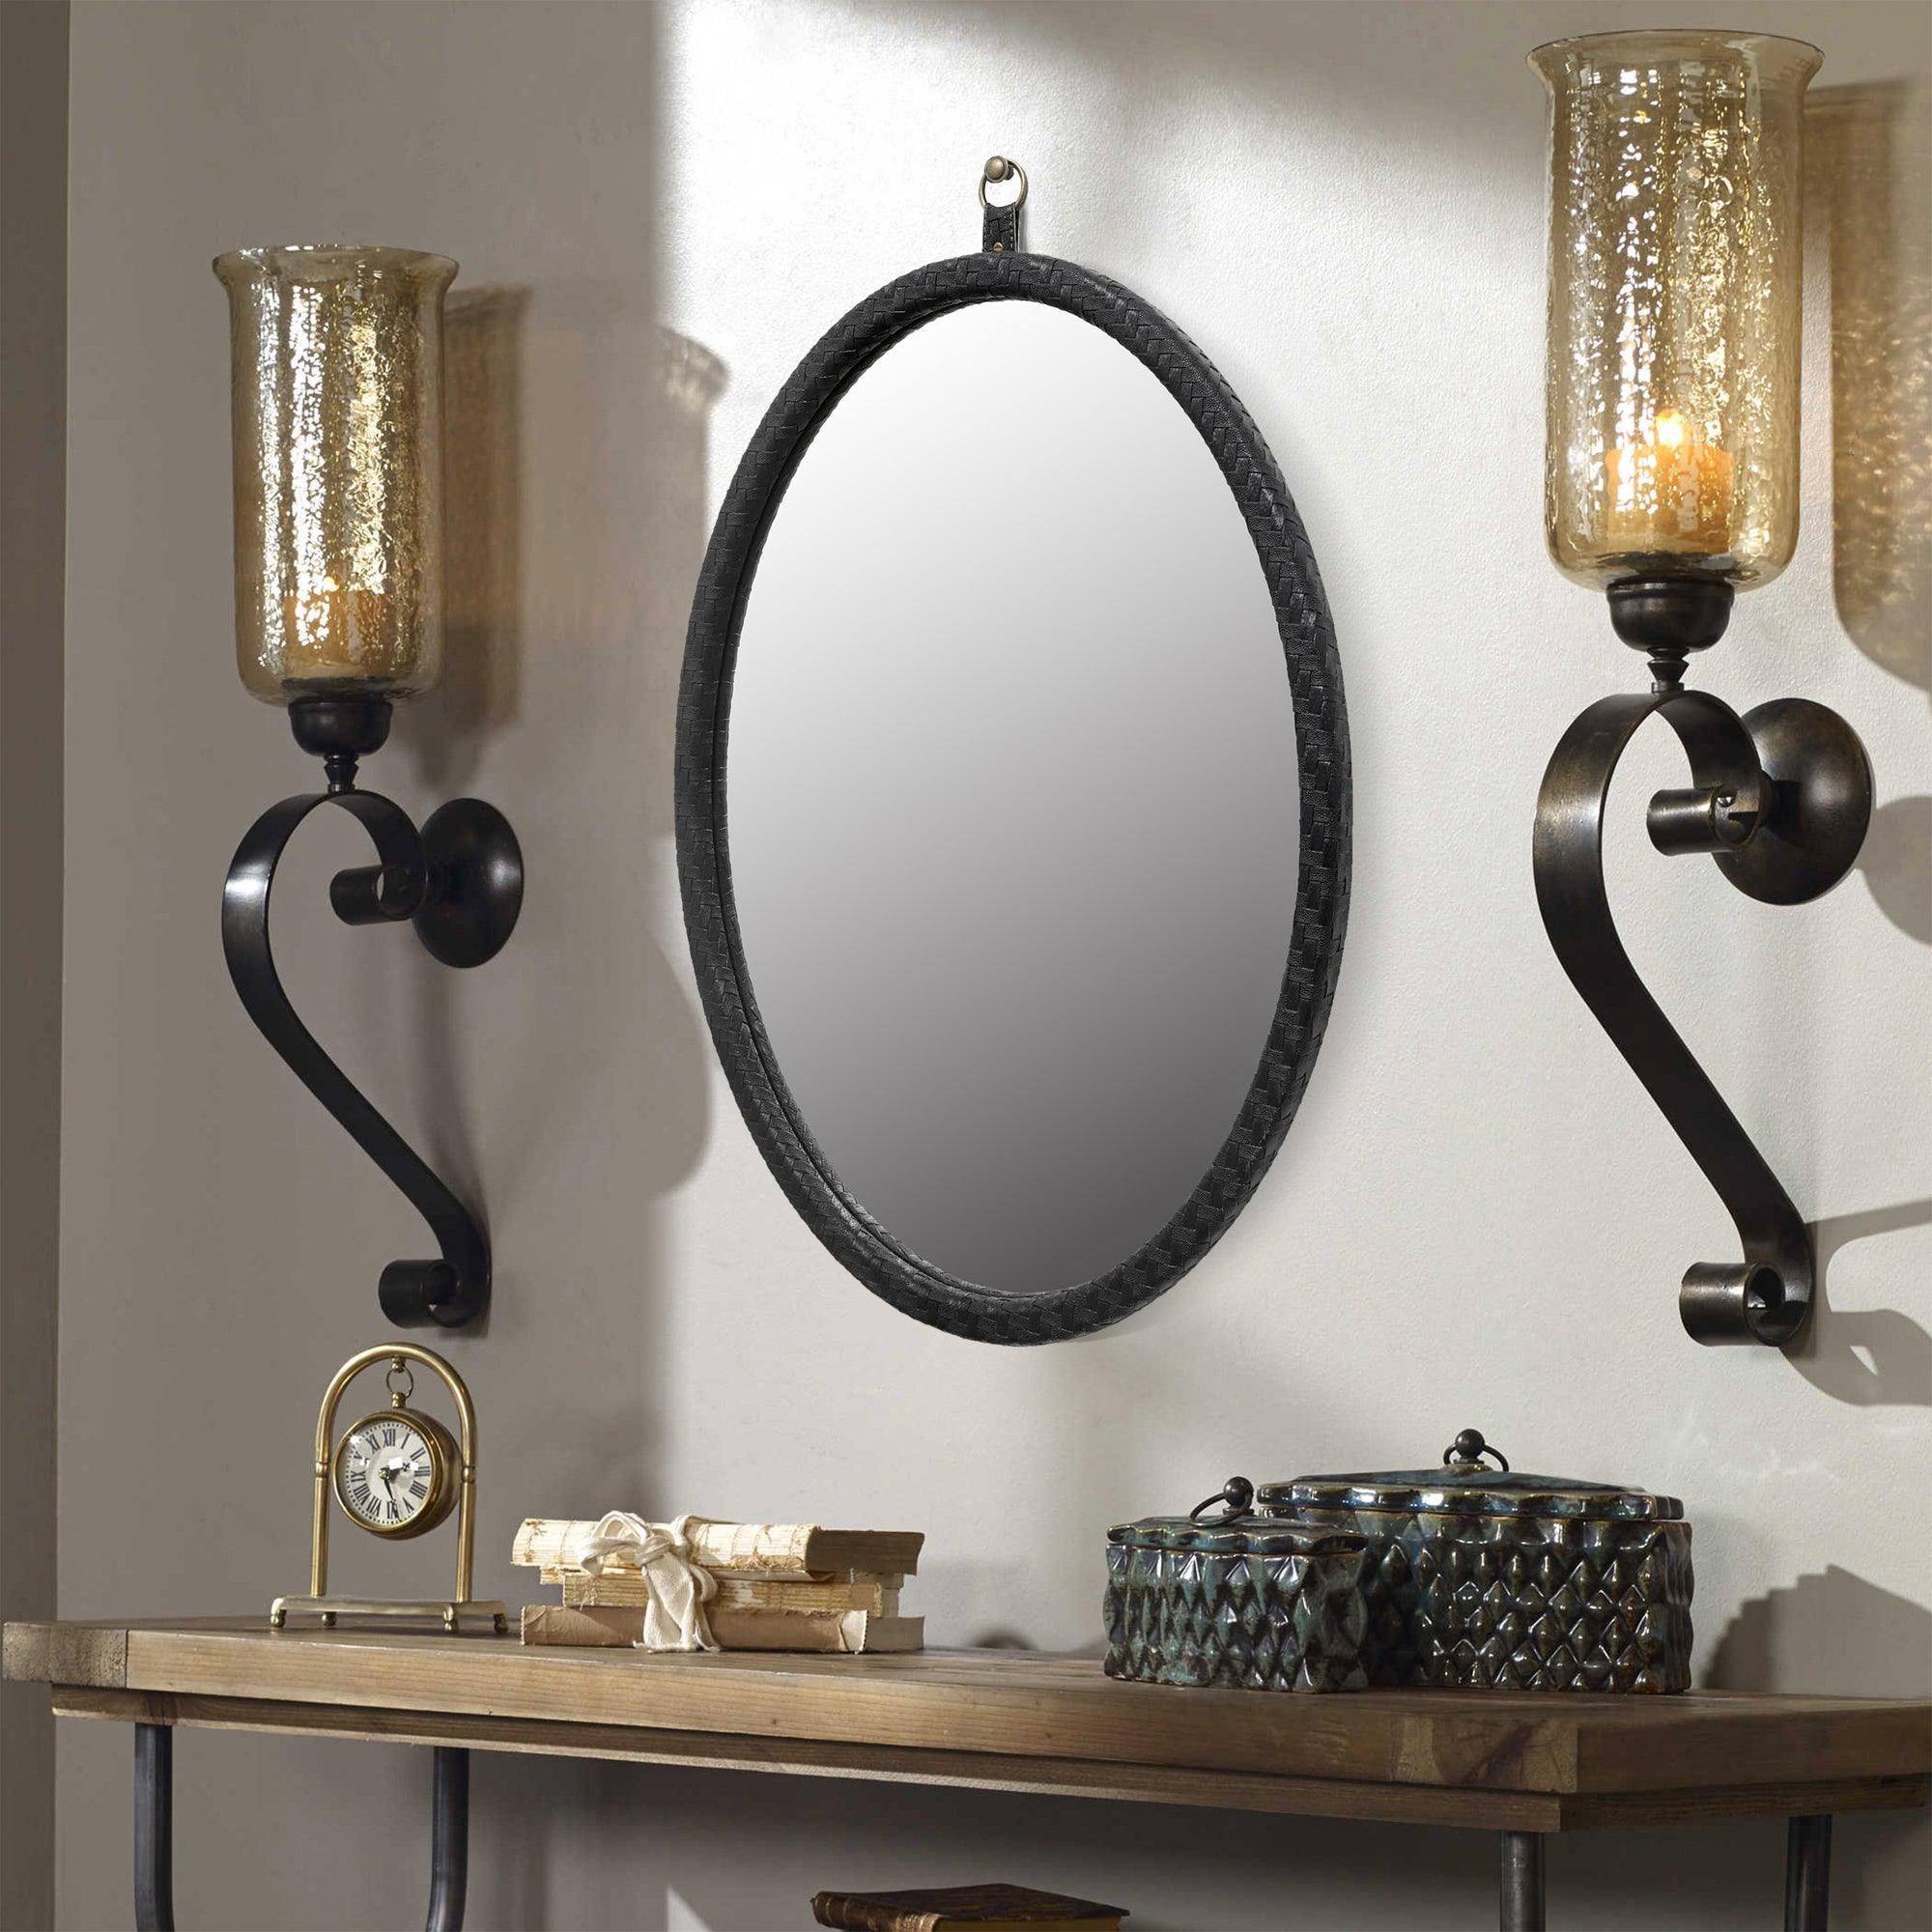 🆓🚛 Oval Black Woven Grain Decorative Wall Hanging Mirror, Pu Covered Mdf Framed Mirror for Bedroom Living Room Vanity Entryway Wall Decor, 23.62X29.92"